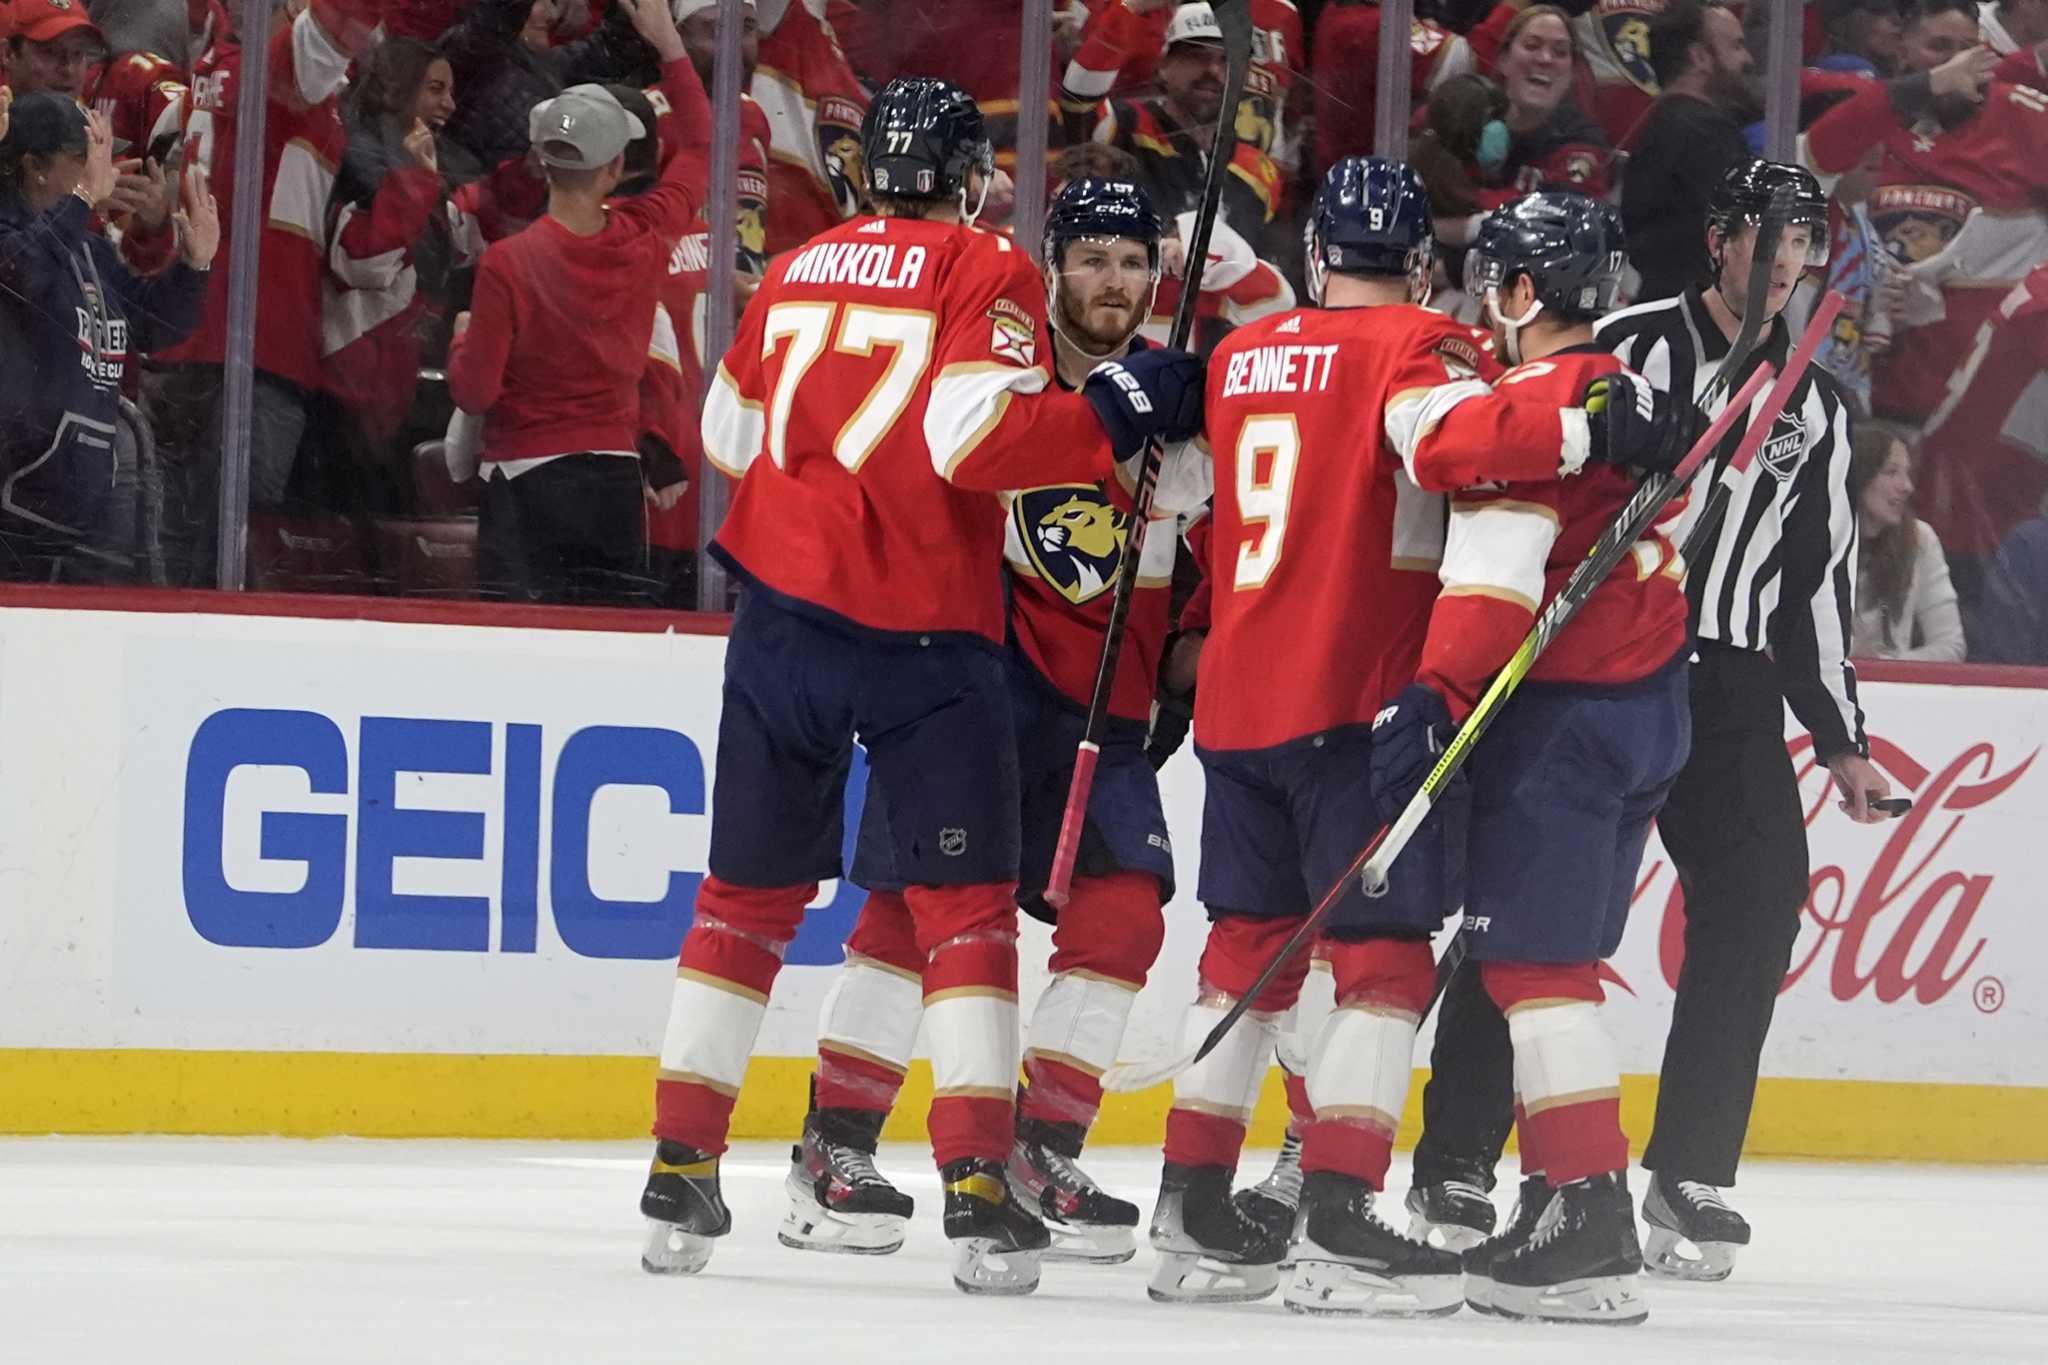 The Panthers are back in the Stanley Cup Final after losing in the title round last year